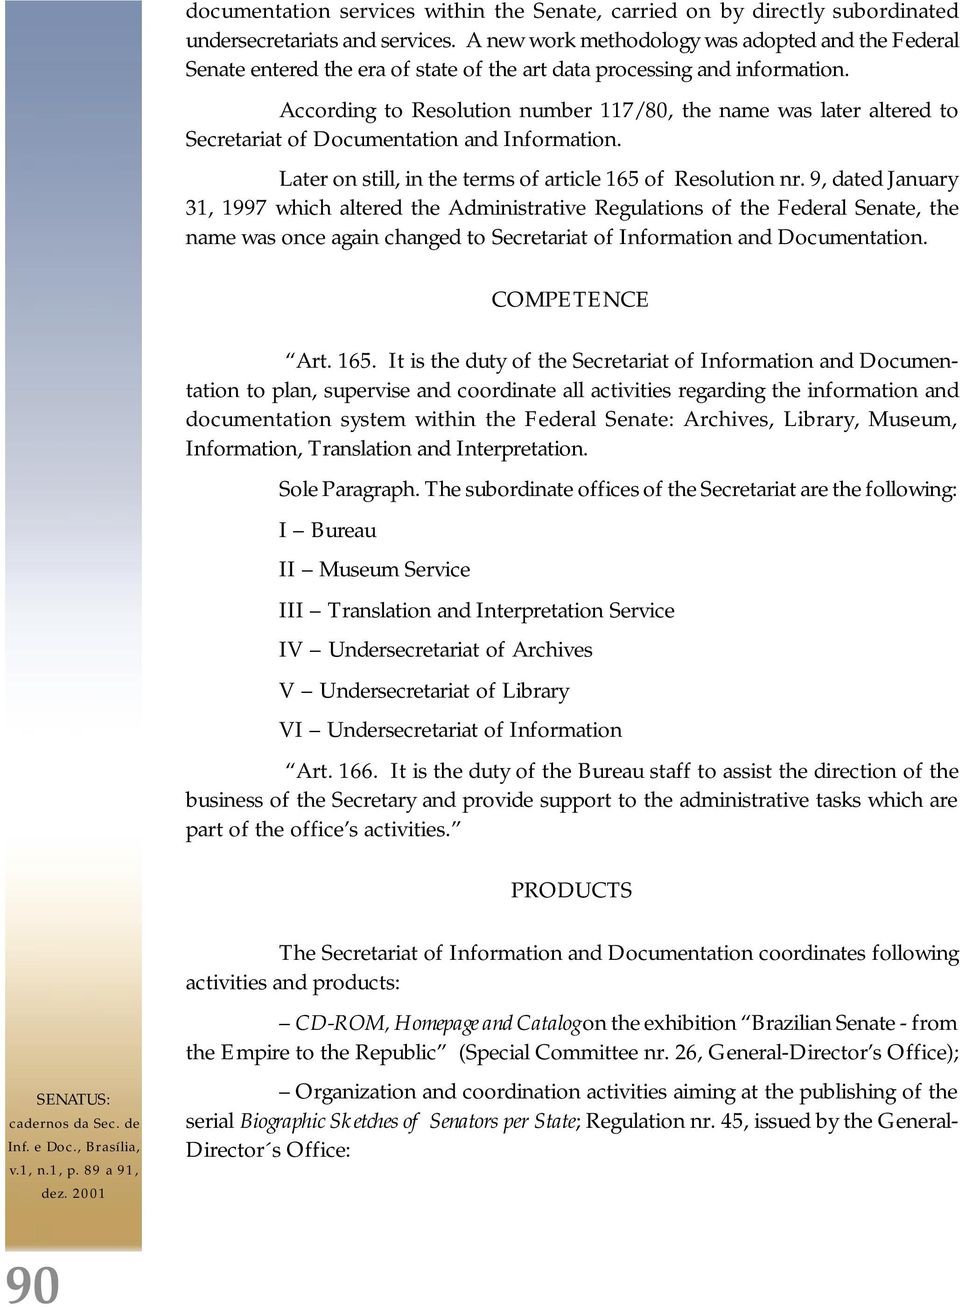 According to Resolution number 117/80, the name was later altered to Secretariat of Documentation and Information. Later on still, in the terms of article 165 of Resolution nr.